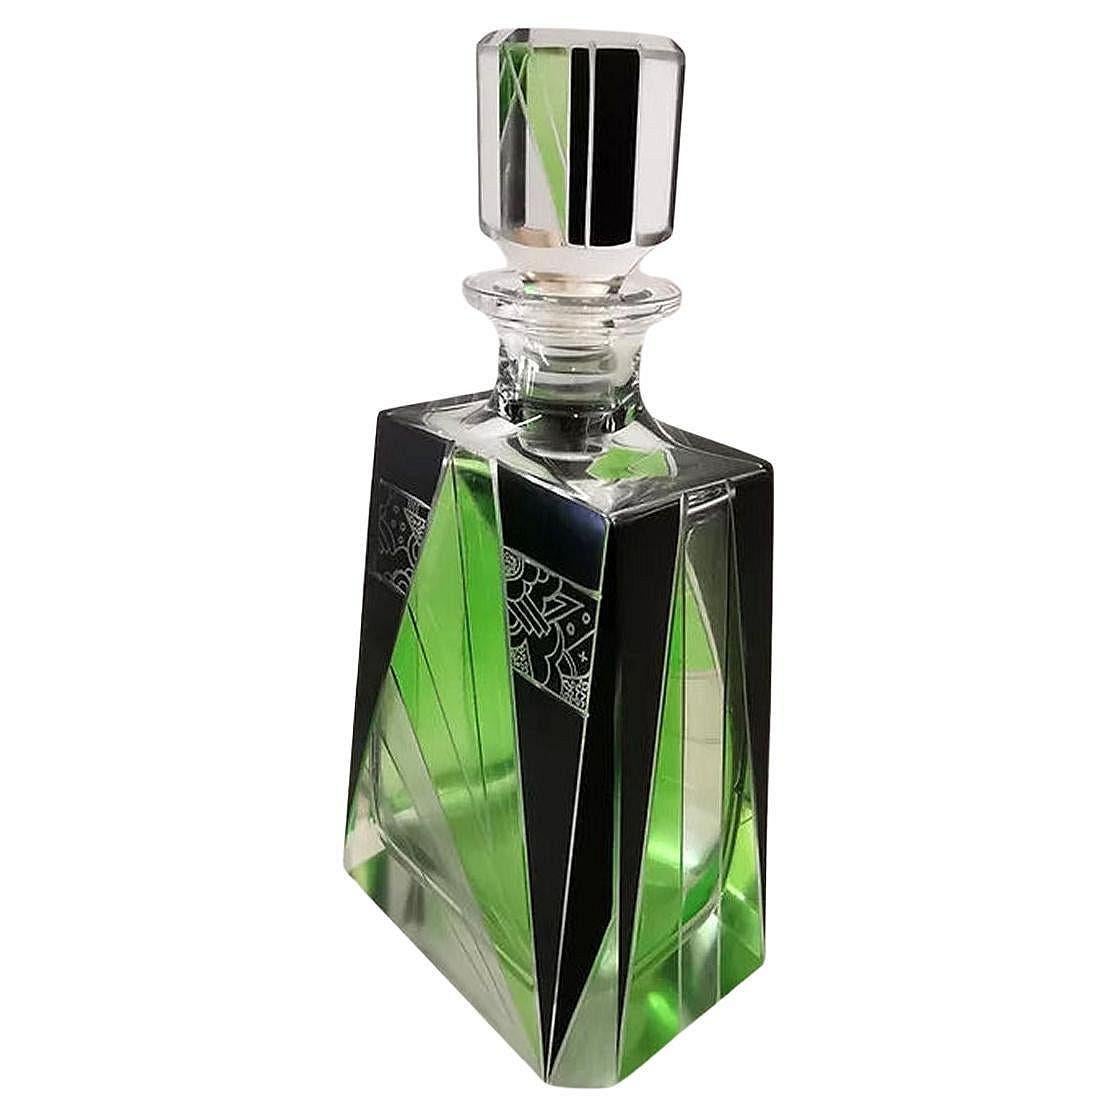 Very high quality, very striking looking 1930's Art Deco Czech glass decanter set. Features a classic shape crystal decanter with stopper and six decent sized glass tumblers . The whole set is enamelled in lime green and black enamel with acid